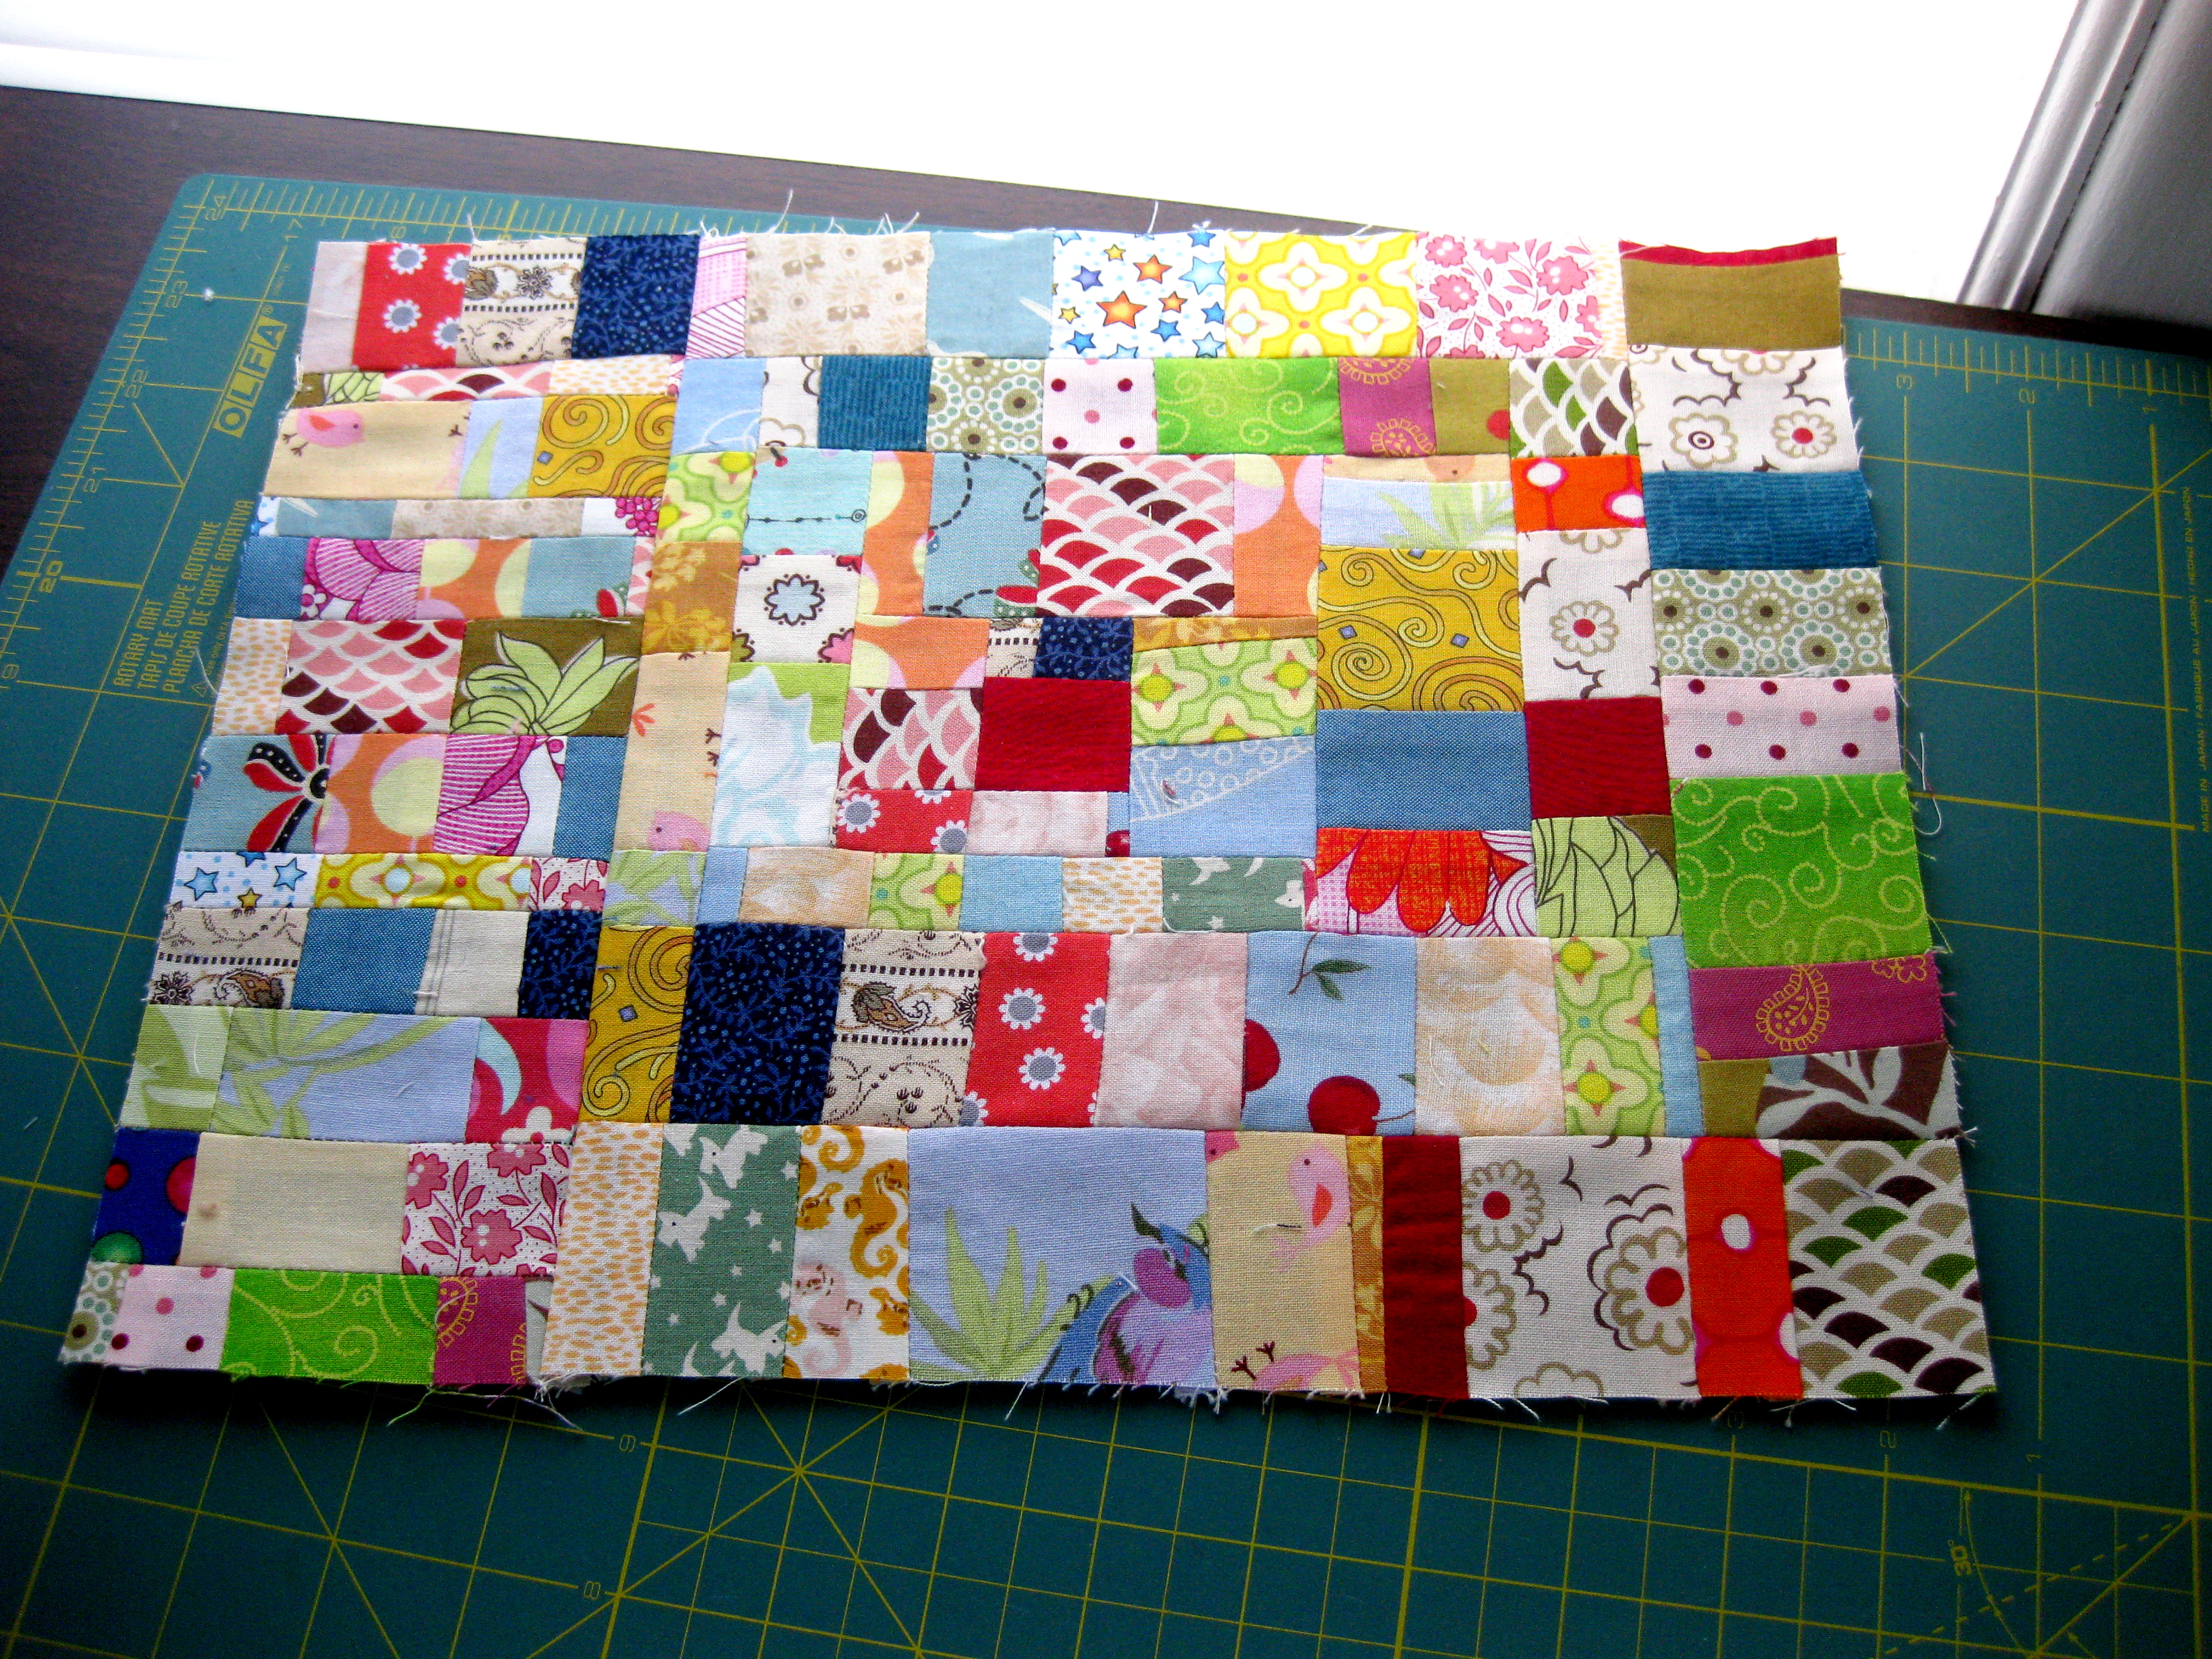 How To Mix Up Scraps For A Scrap Quilt